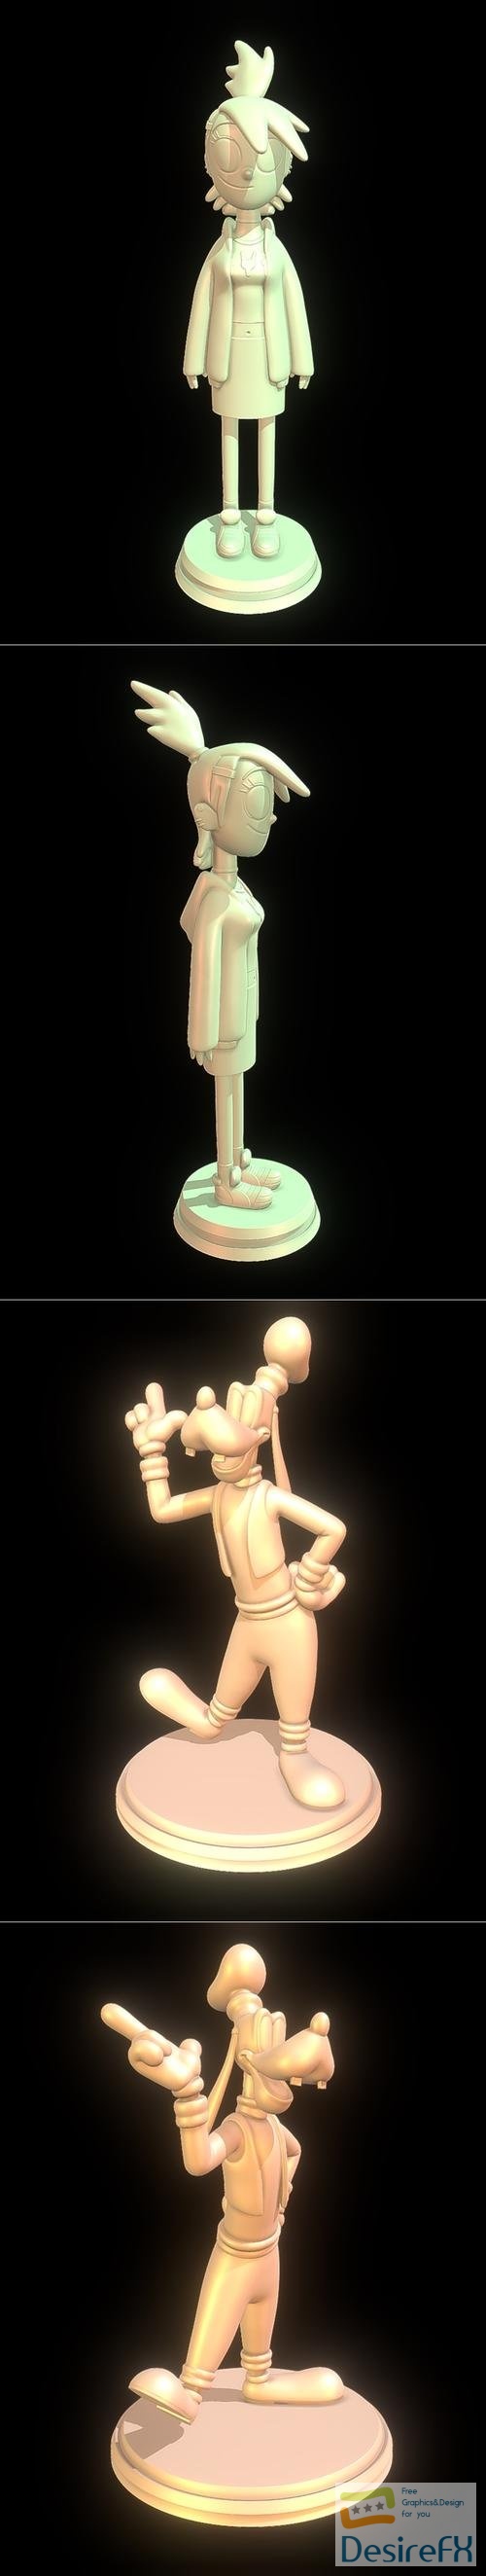 Frankie Foster and Goofy – 3D Print